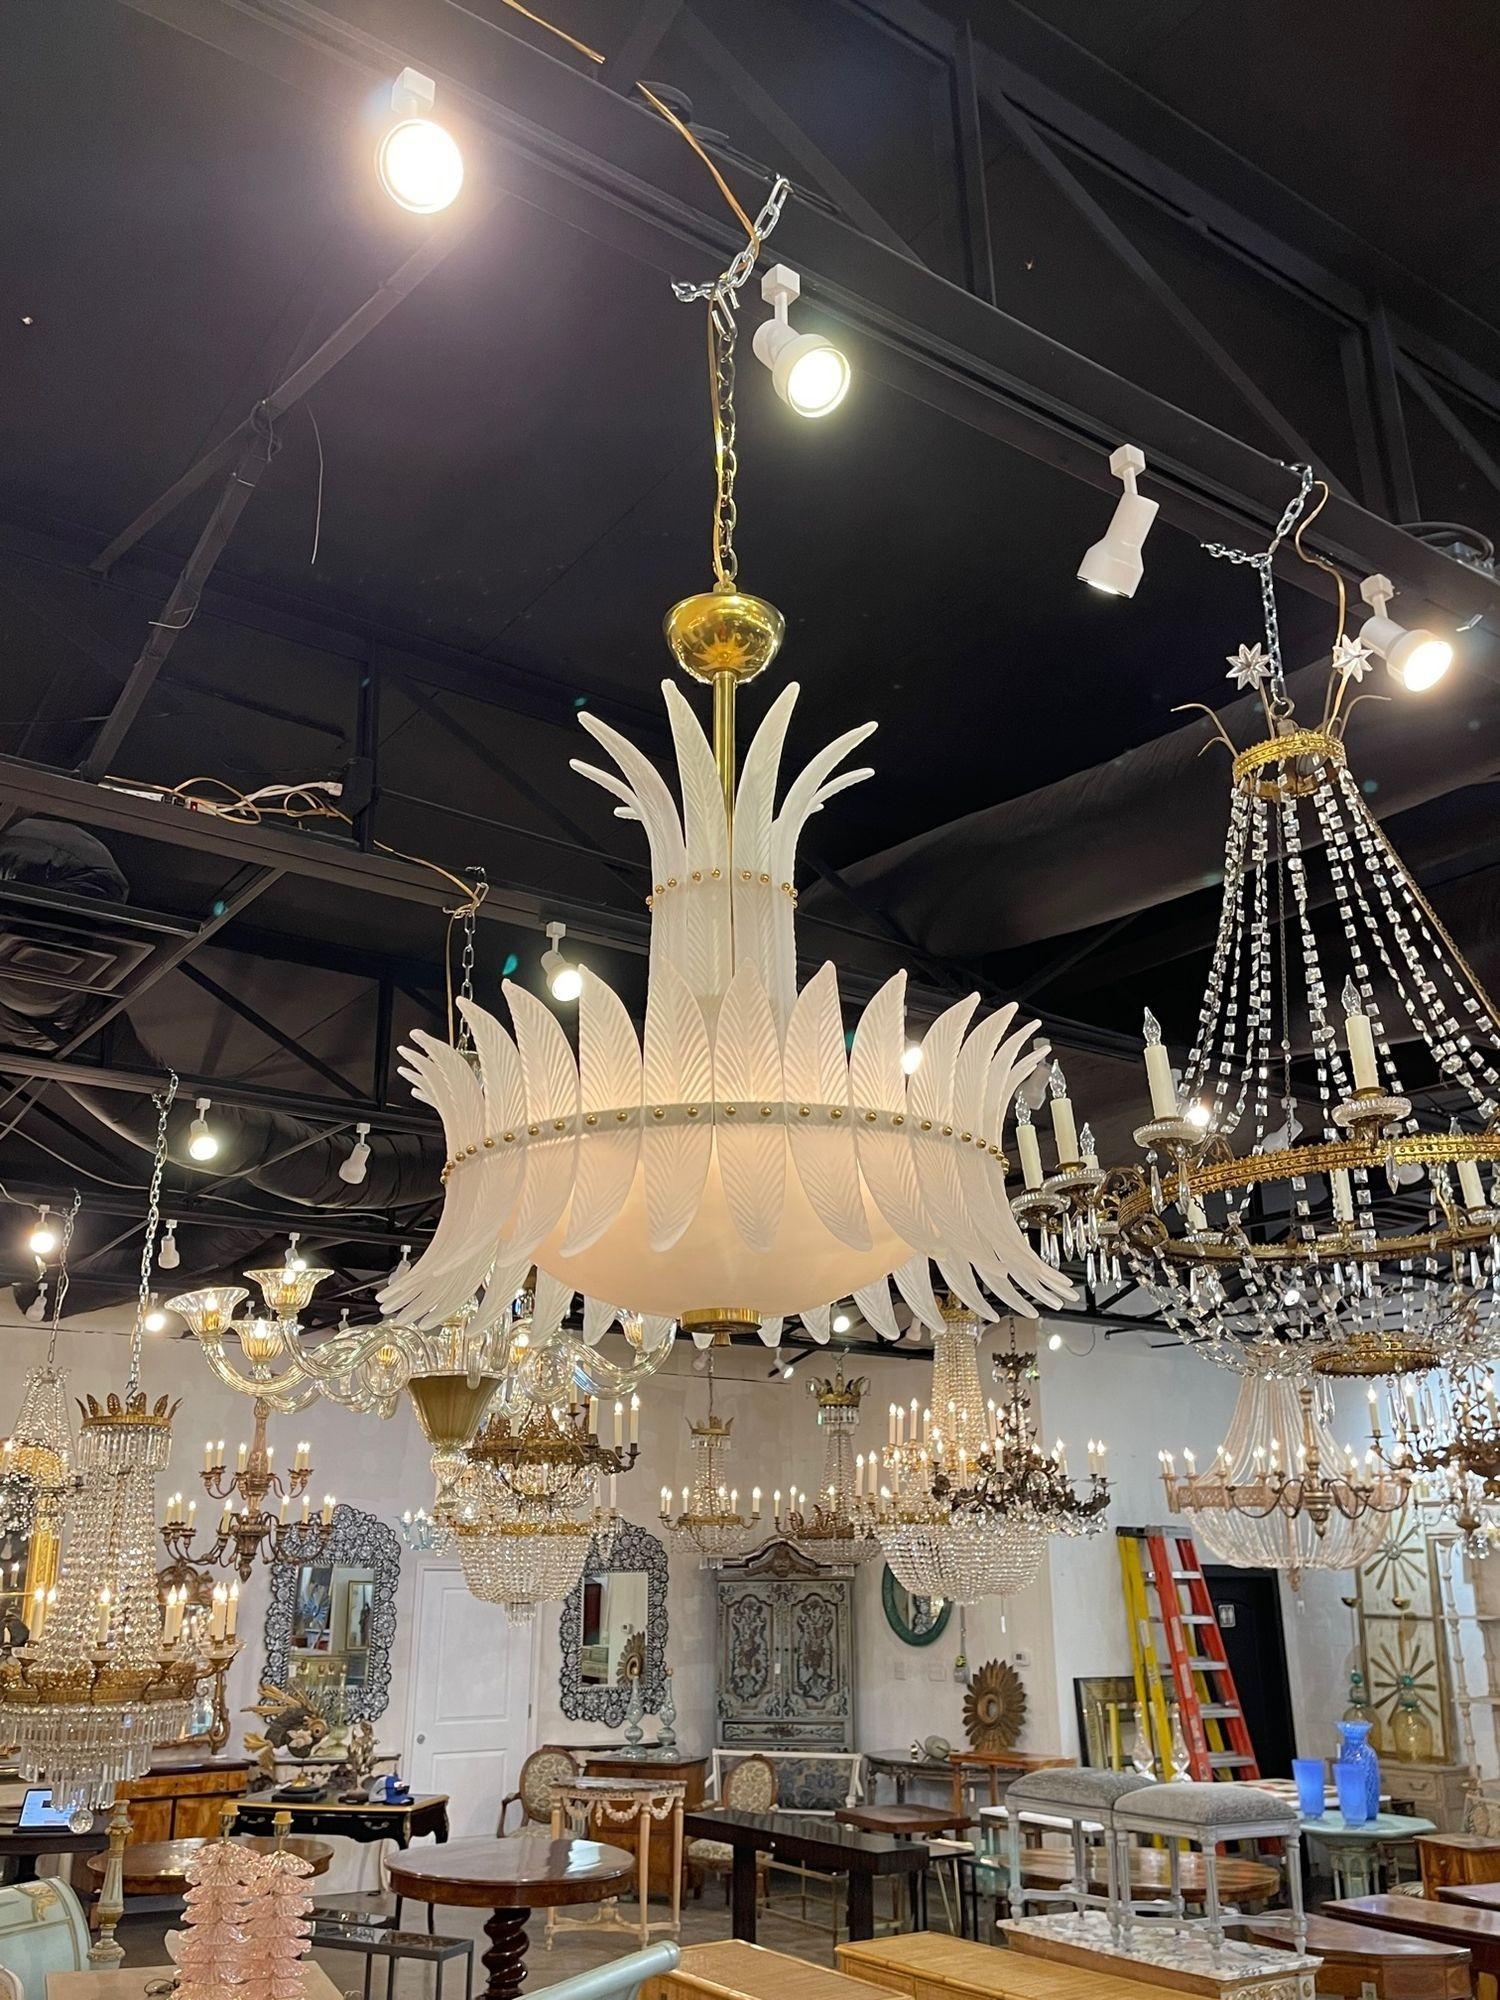 Beautiful modern Art Deco style modern Murano glass Plume chandelier. Exceptional quality with gorgeous textured glass! Creates a very stylish upscale look!